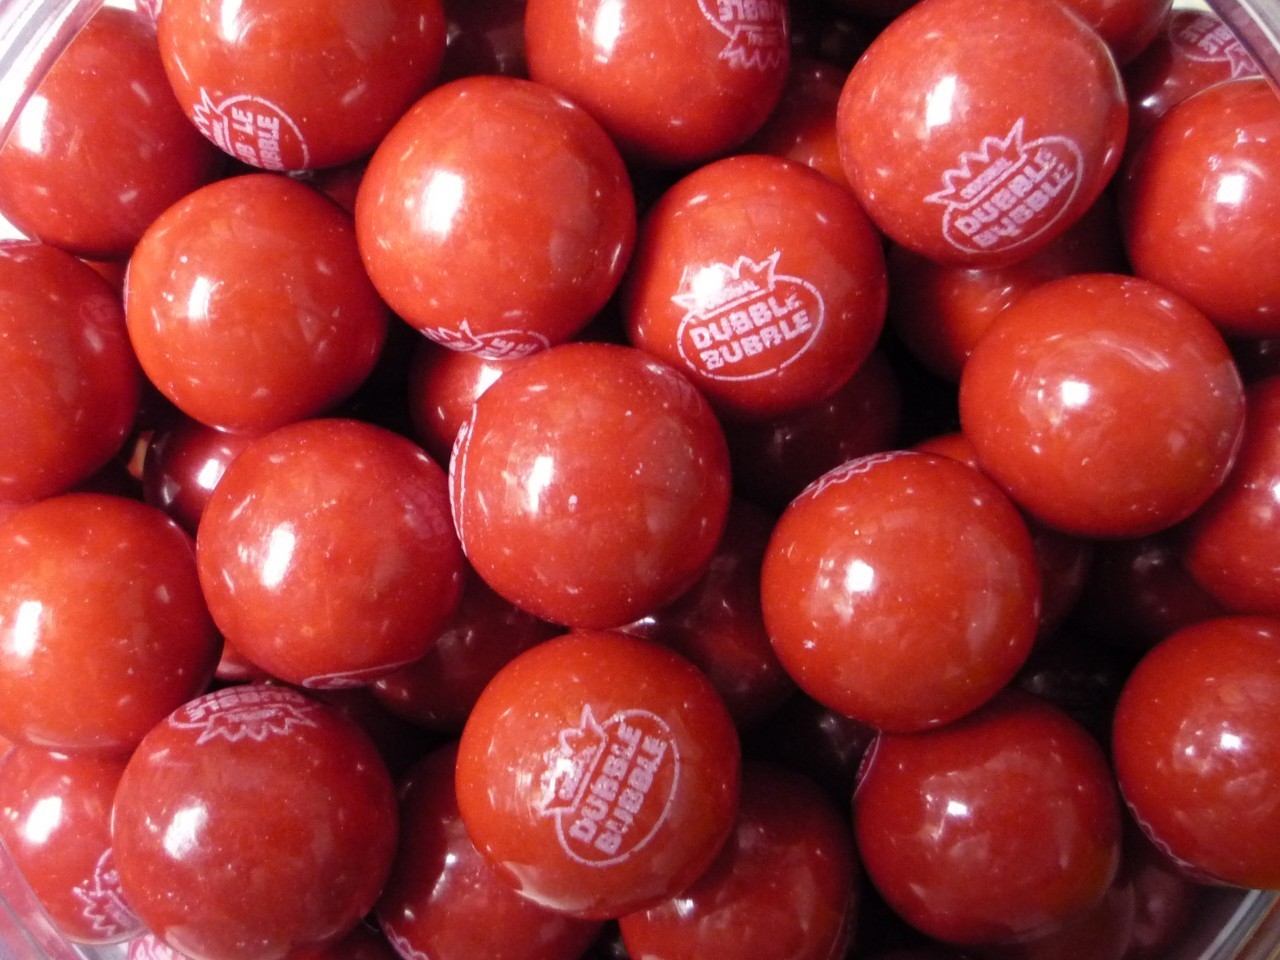 Sweet Cherry 1 Dubble Bubble 5 LBs - Candy Gumballs 25mm